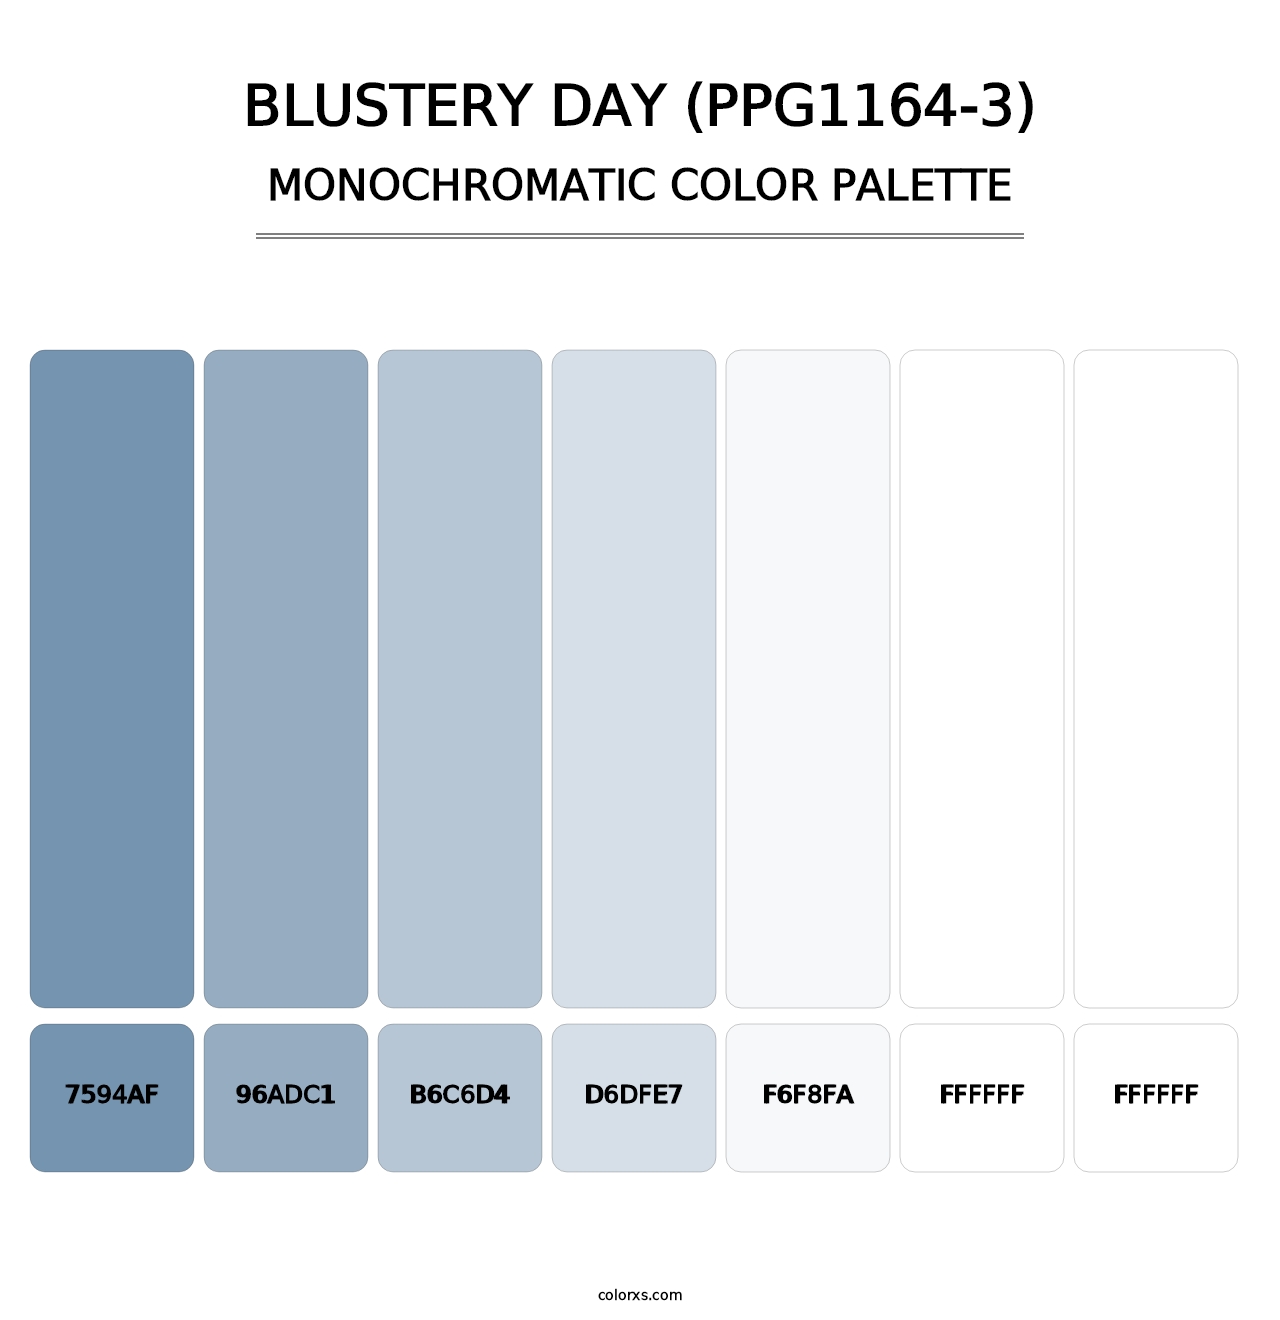 Blustery Day (PPG1164-3) - Monochromatic Color Palette